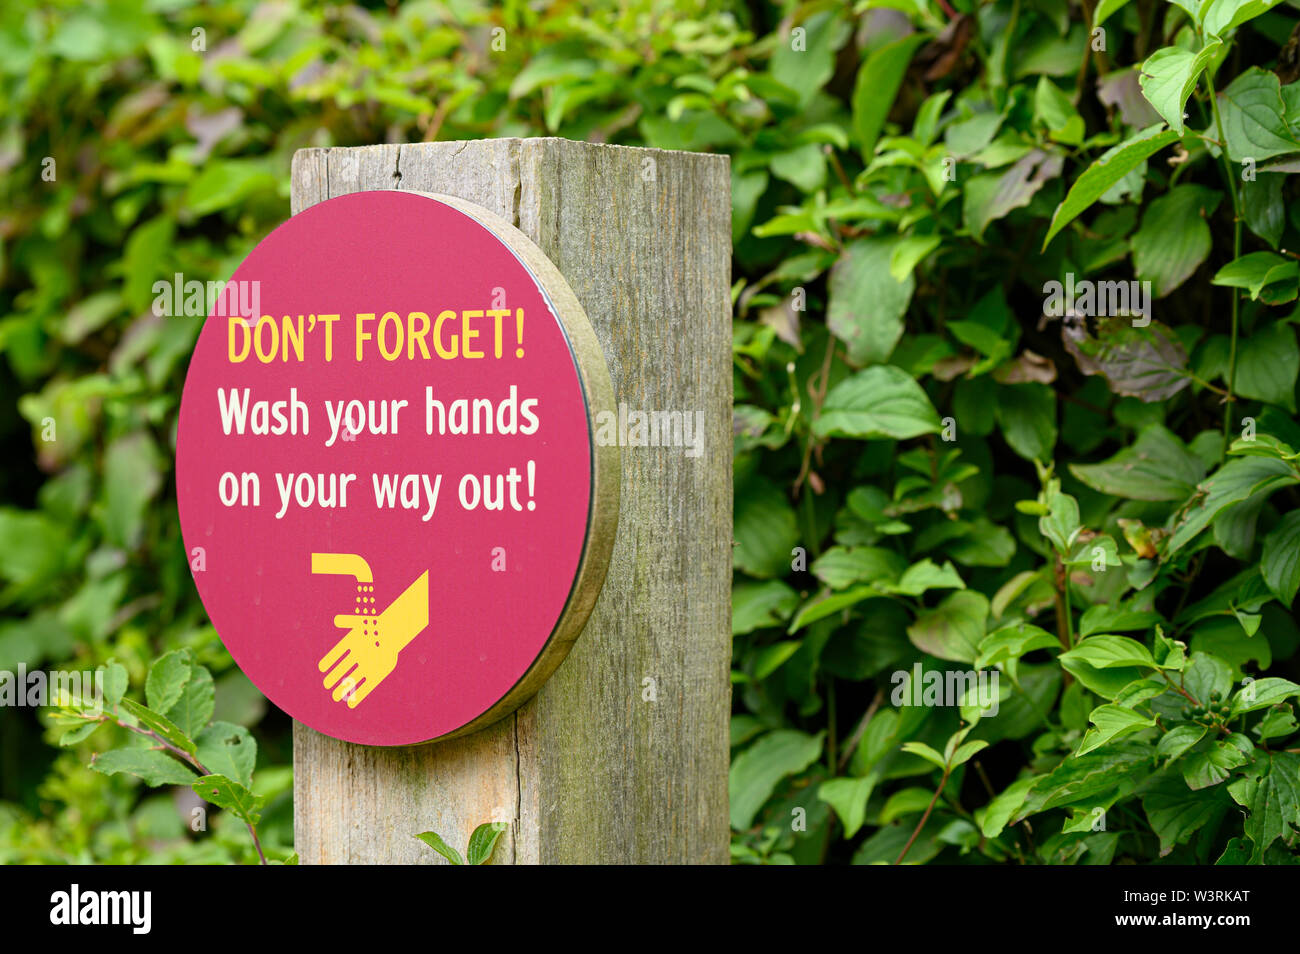 Don't forget wash your hands on your way out sign Stock Photo